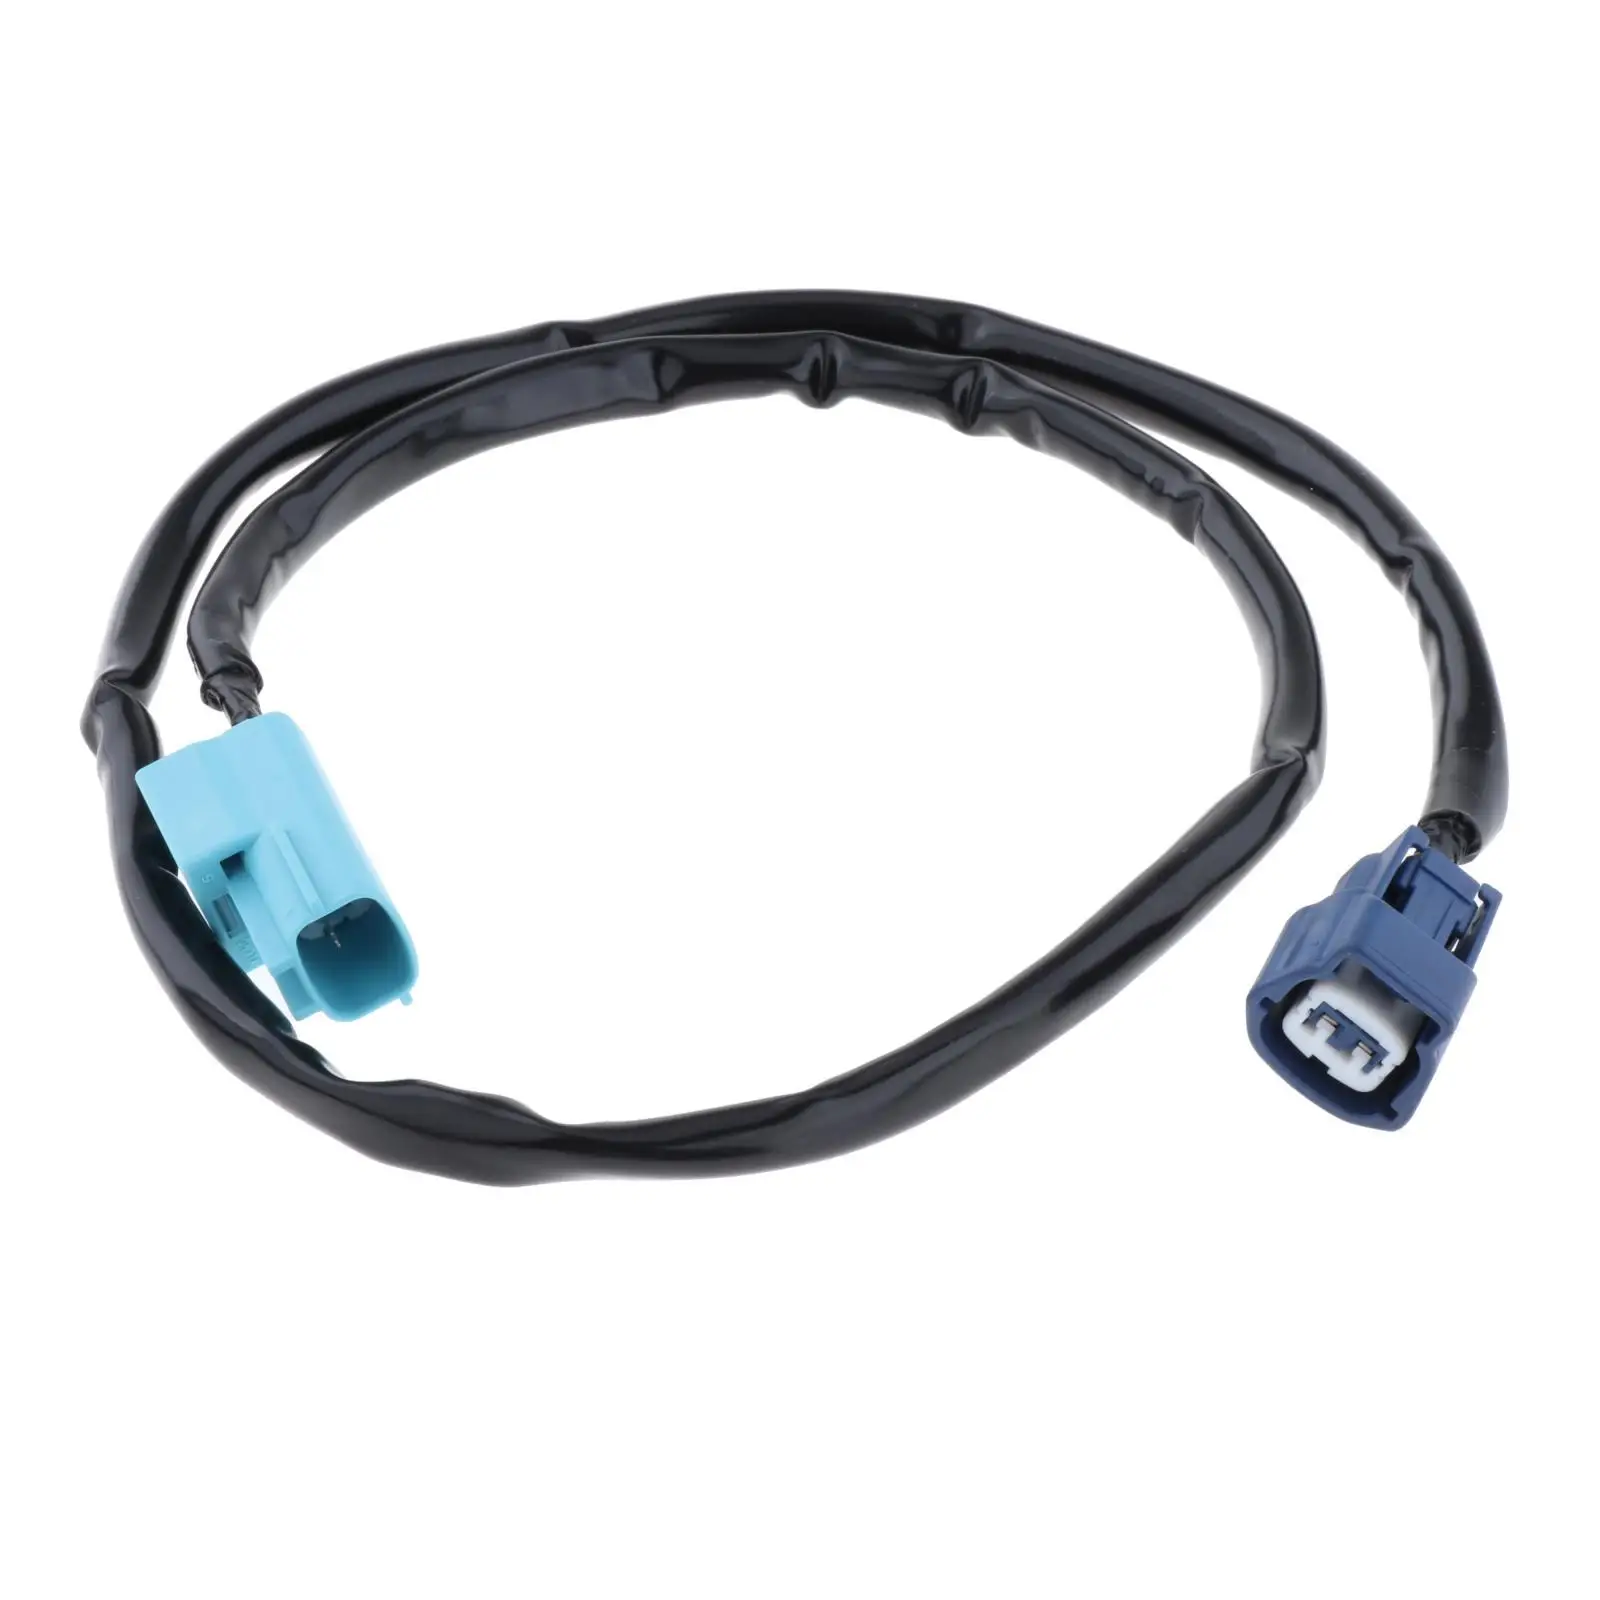 Knock Sensor Wire Wiring sub Harness 139981 Automotive Replace Direct Fit Spart Parts for Nissan 350Z for G35 FX35